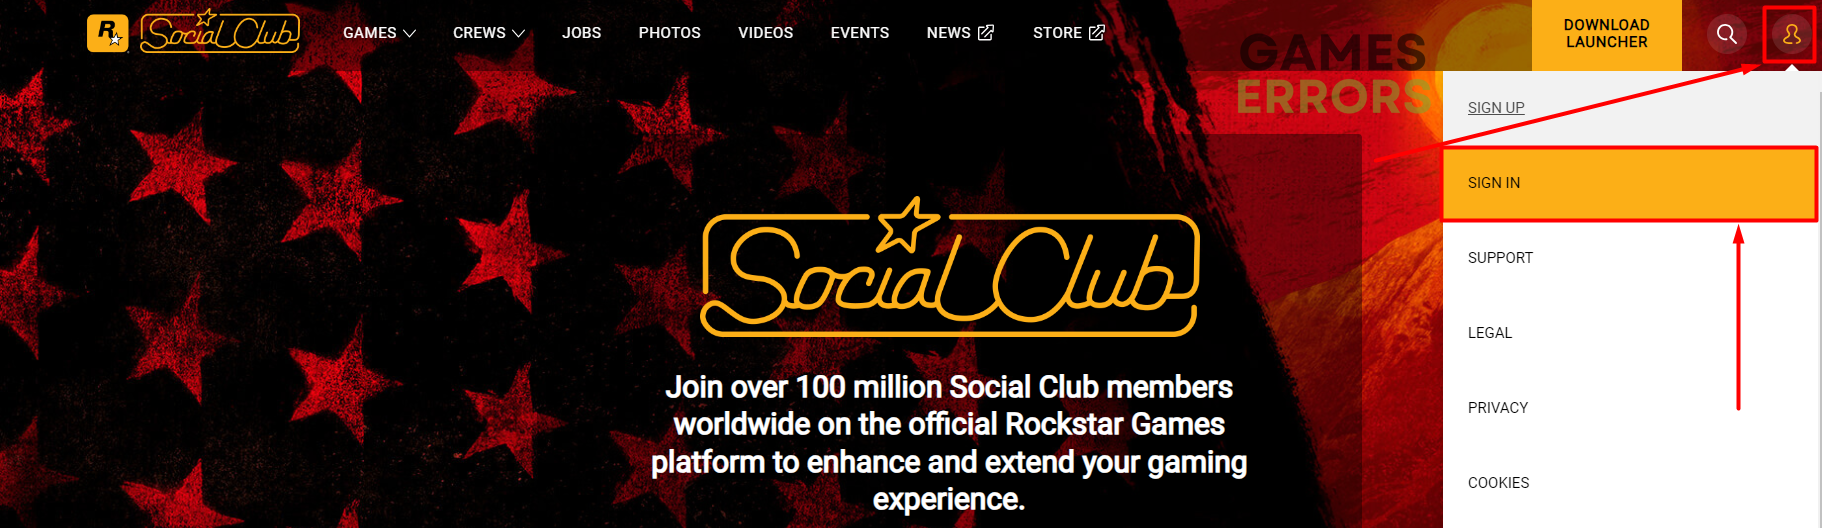 social club account sign in